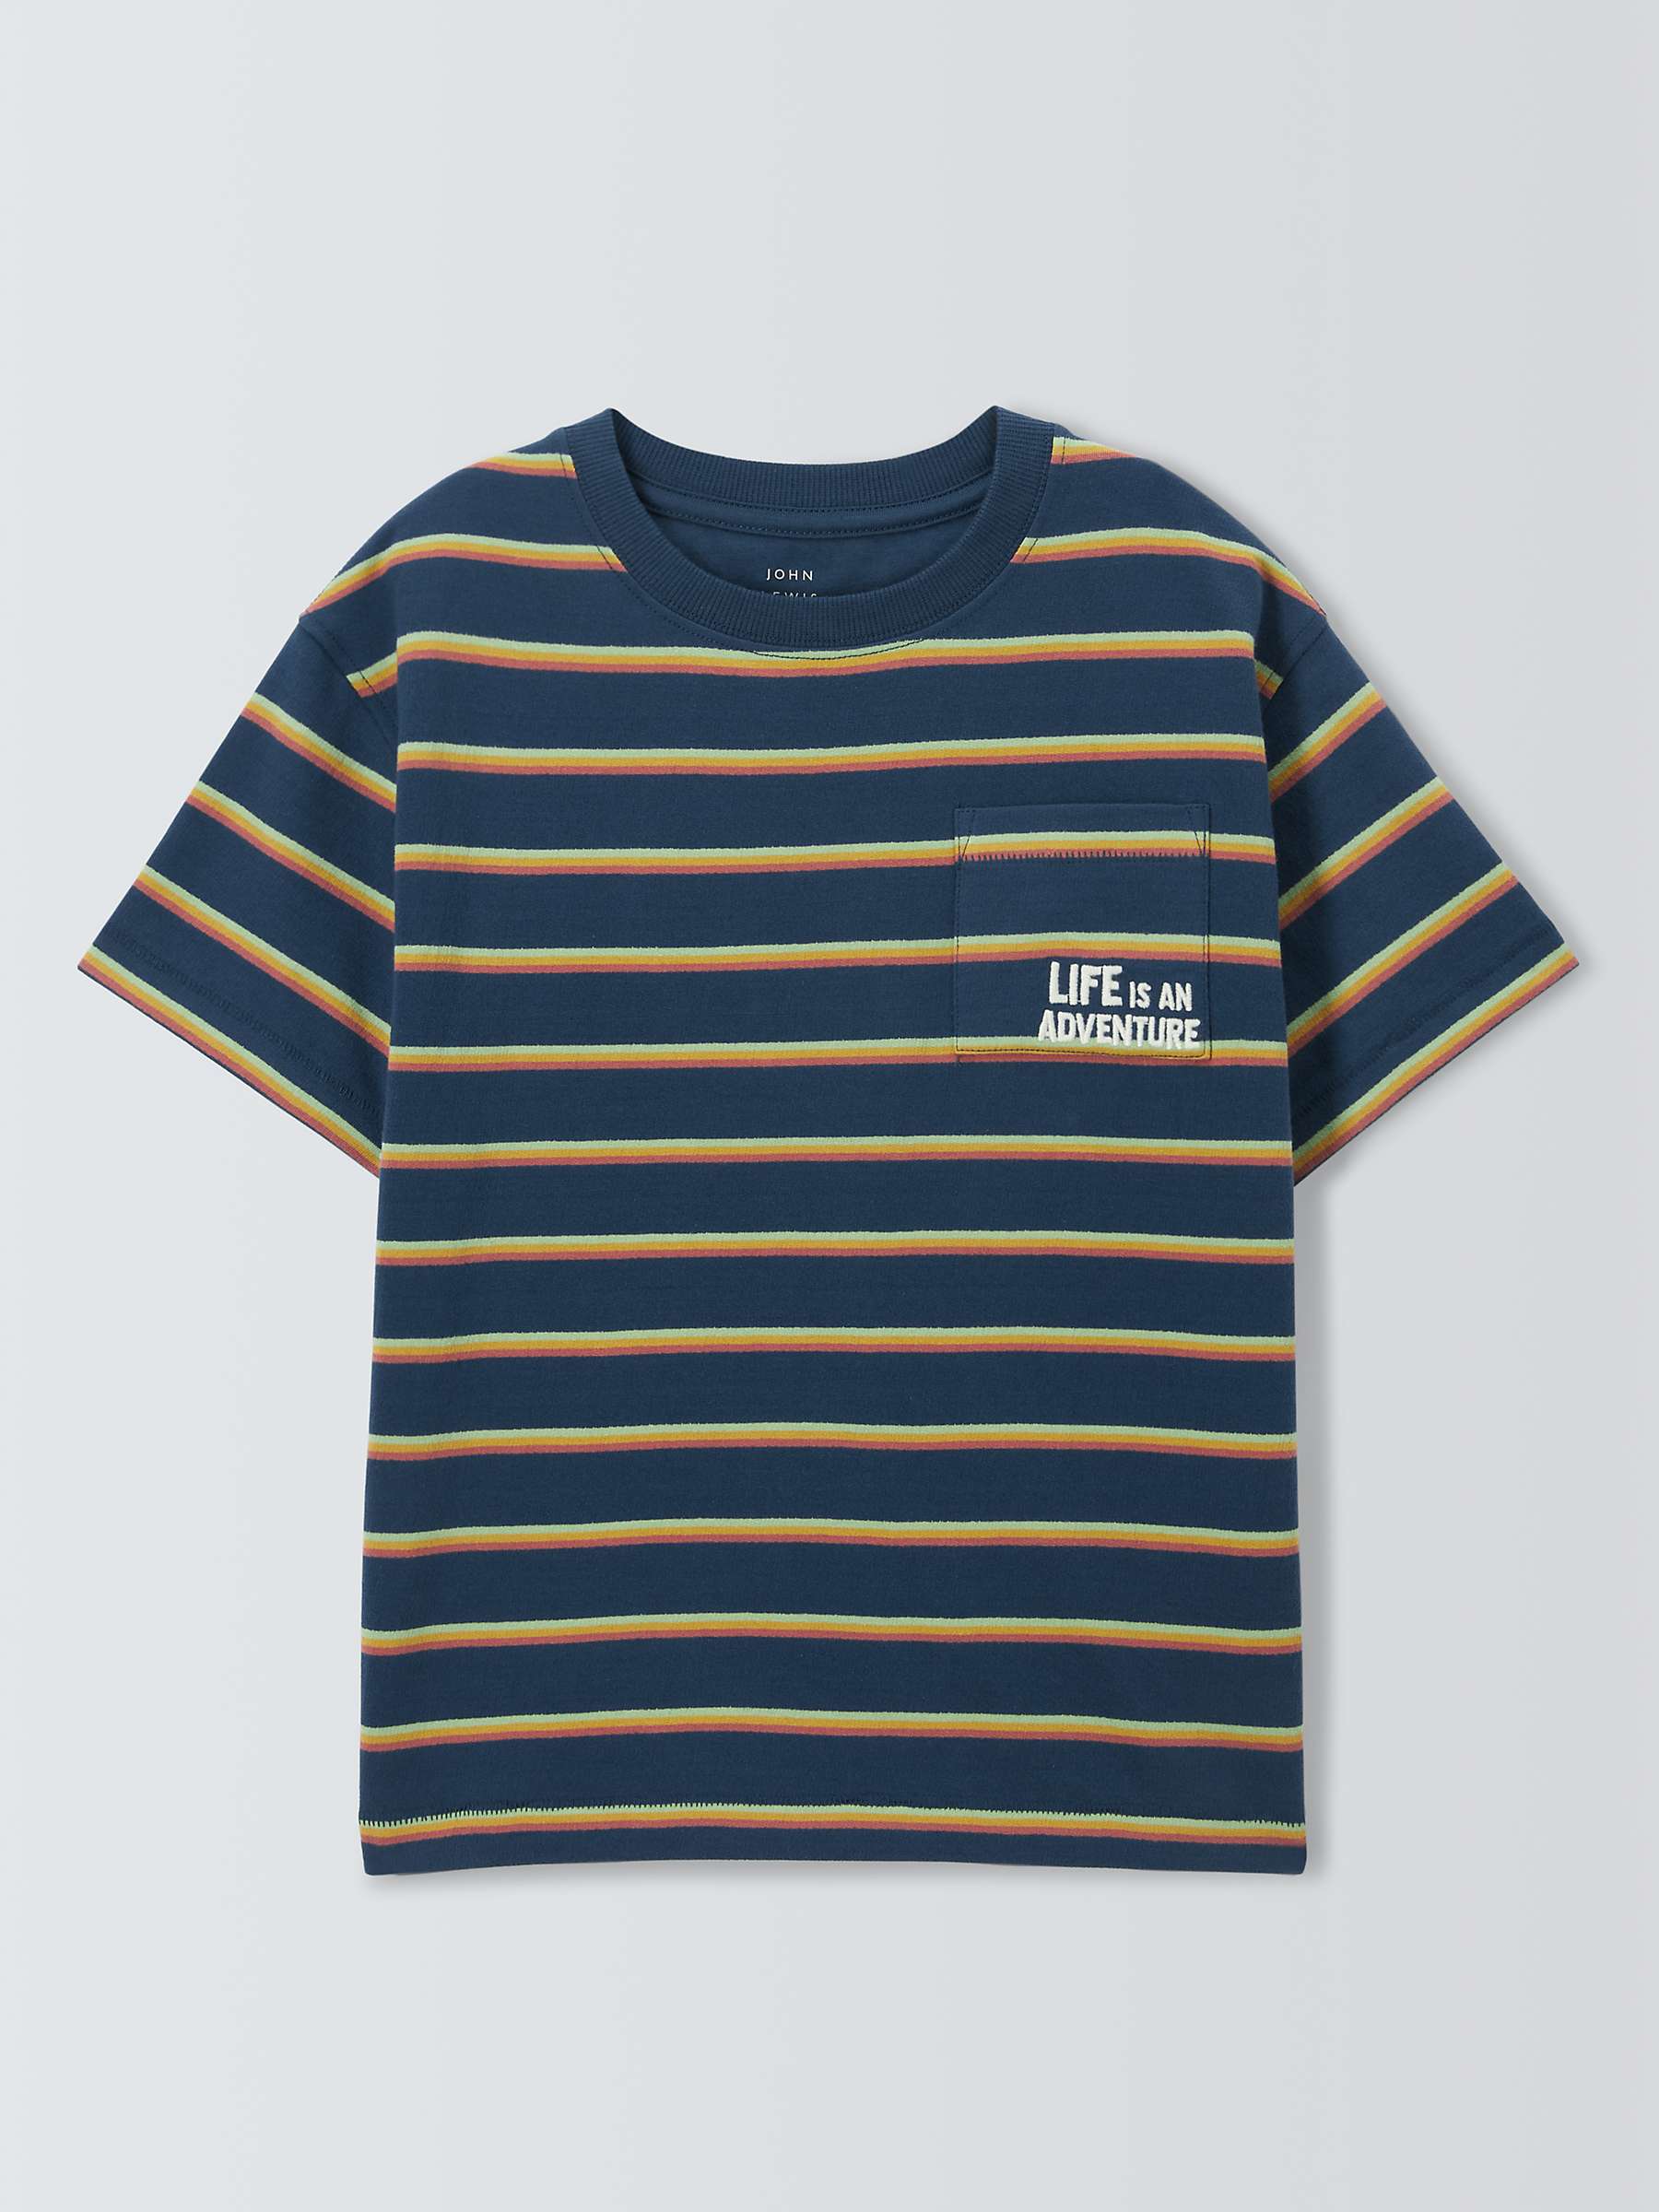 Buy John Lewis Kids' Embroidered Graphic Life Is An Adventure Stripe T-Shirt, Blue Online at johnlewis.com